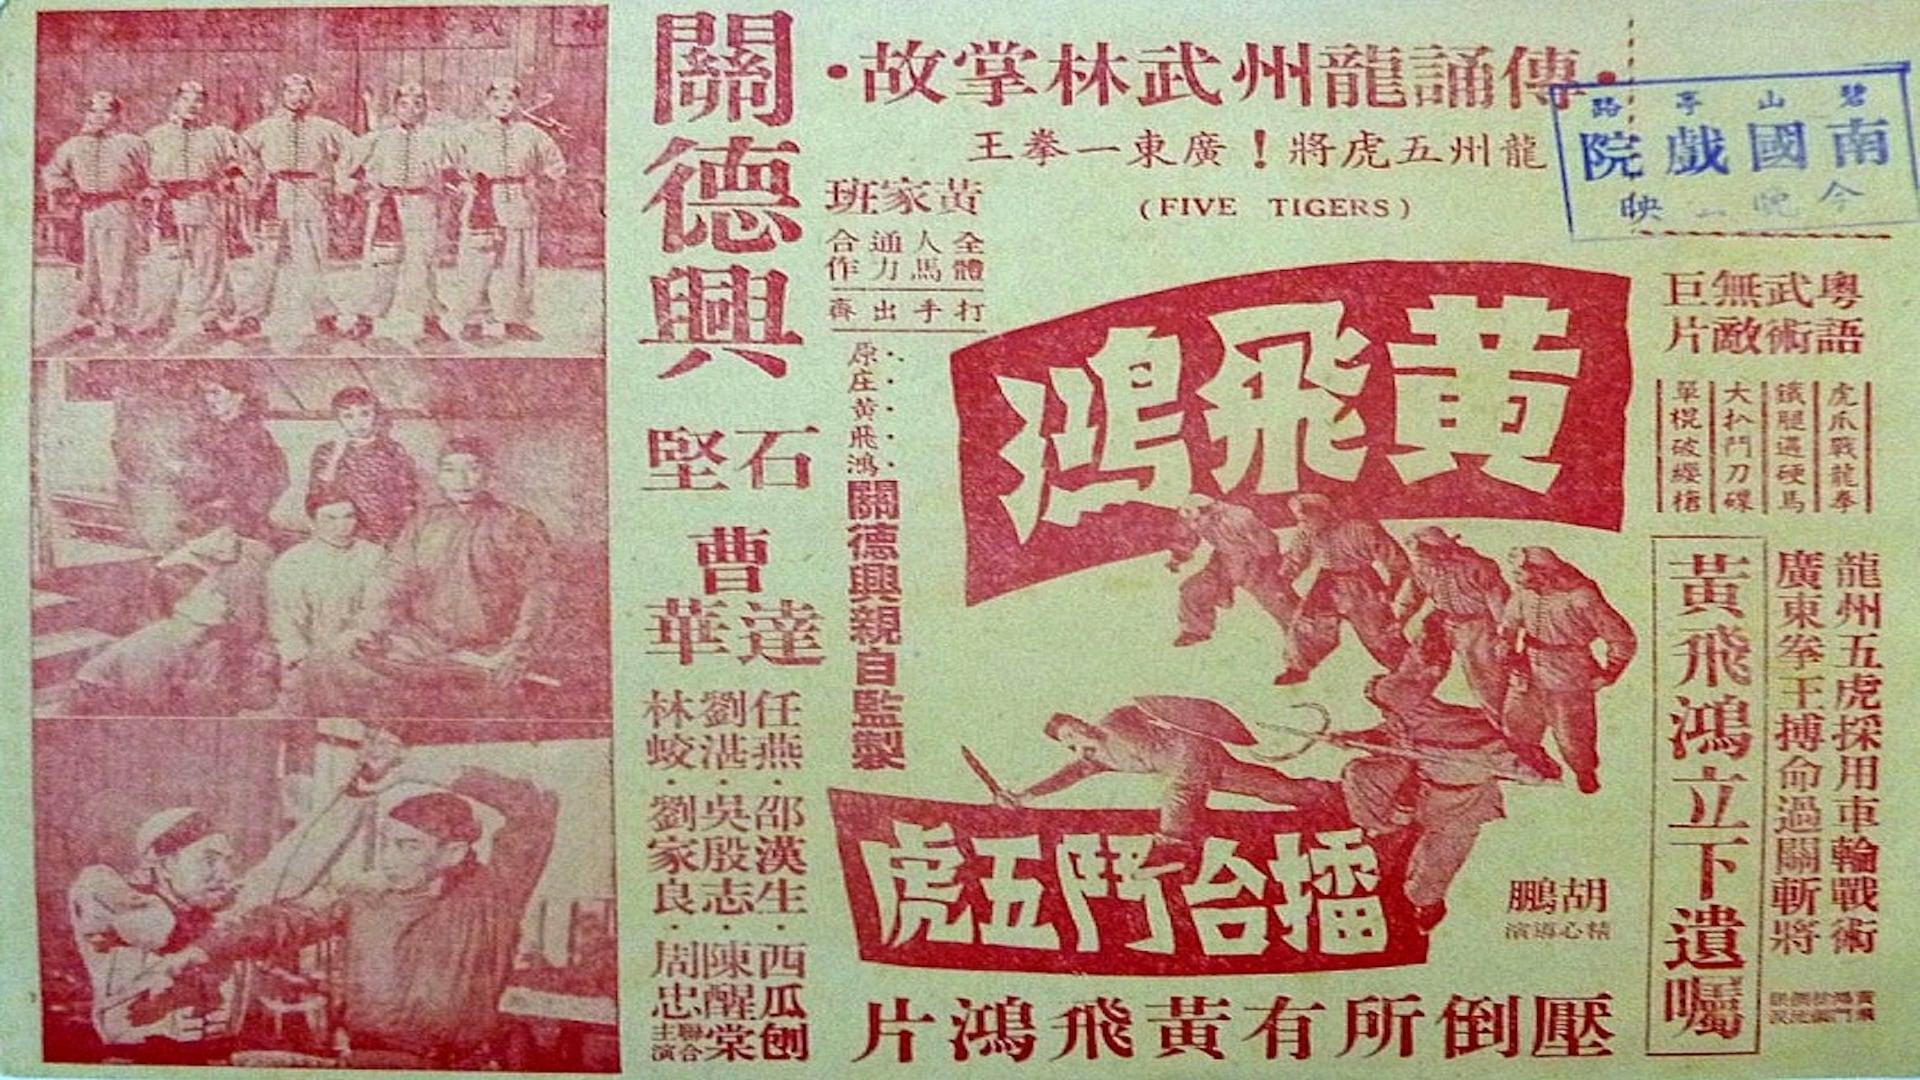 Wong Fei-Hung's Battle with the Five Tigers in the Boxing Ring backdrop